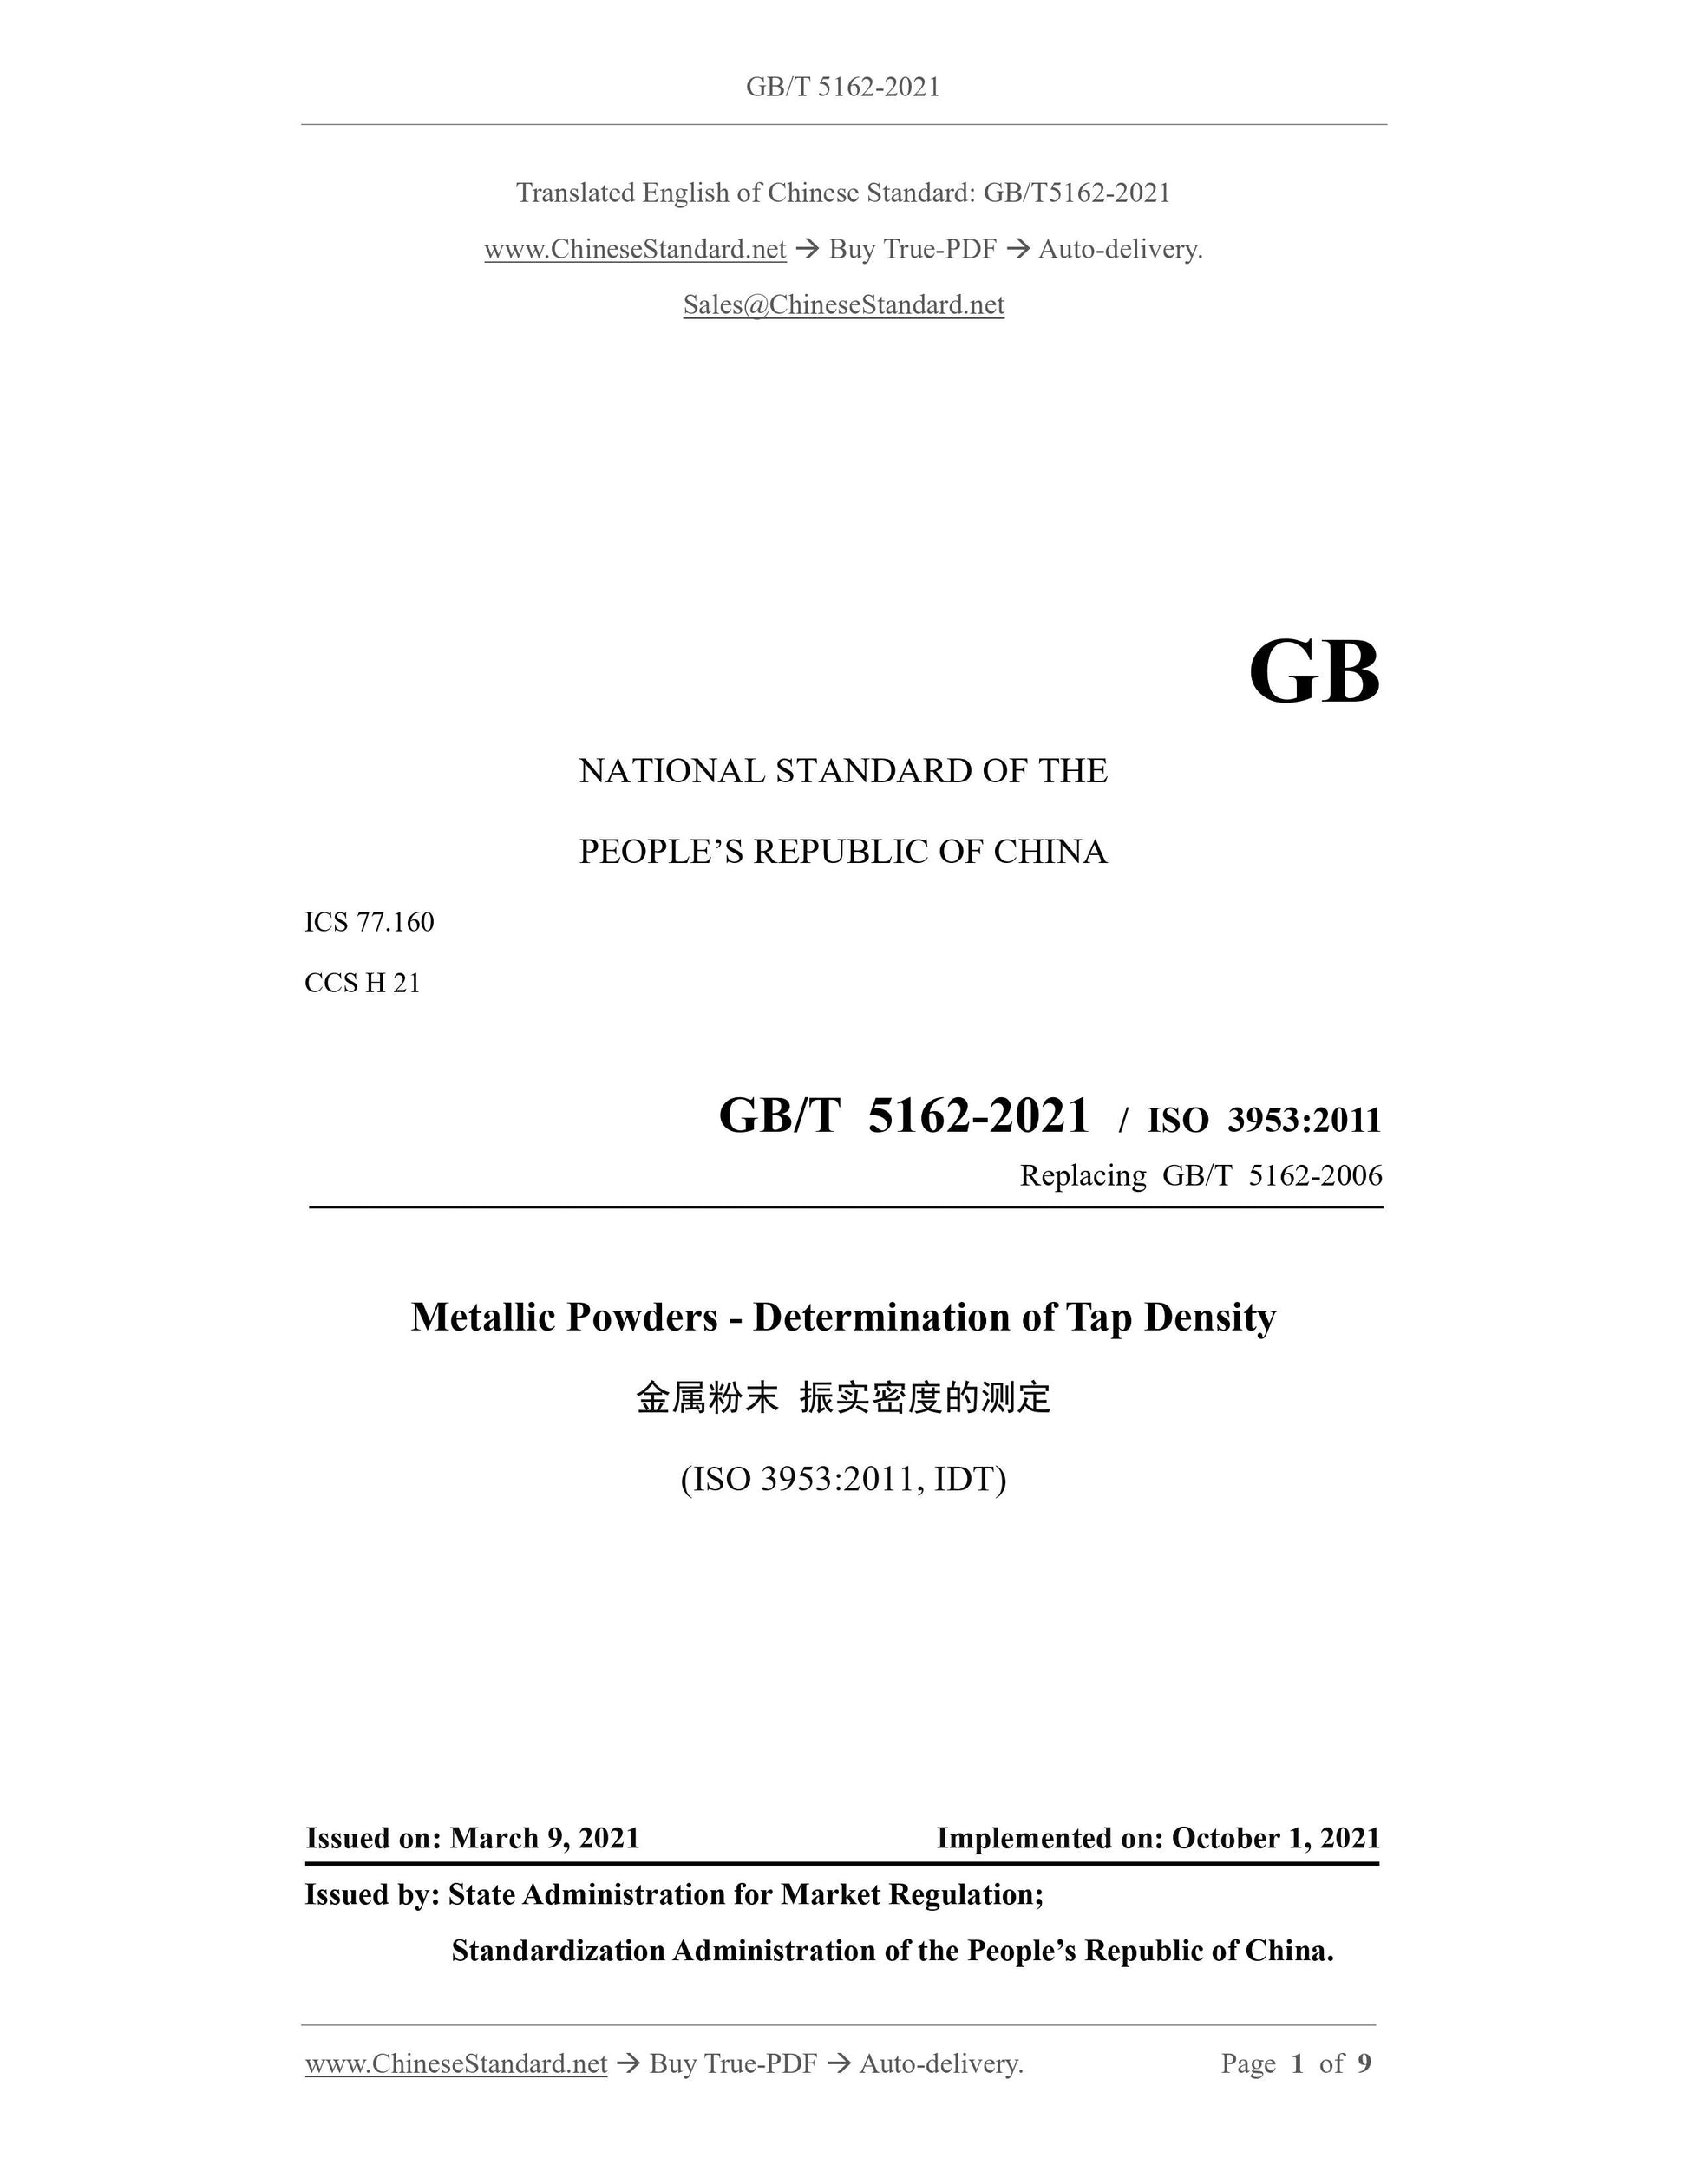 GB/T 5162-2021 Page 1